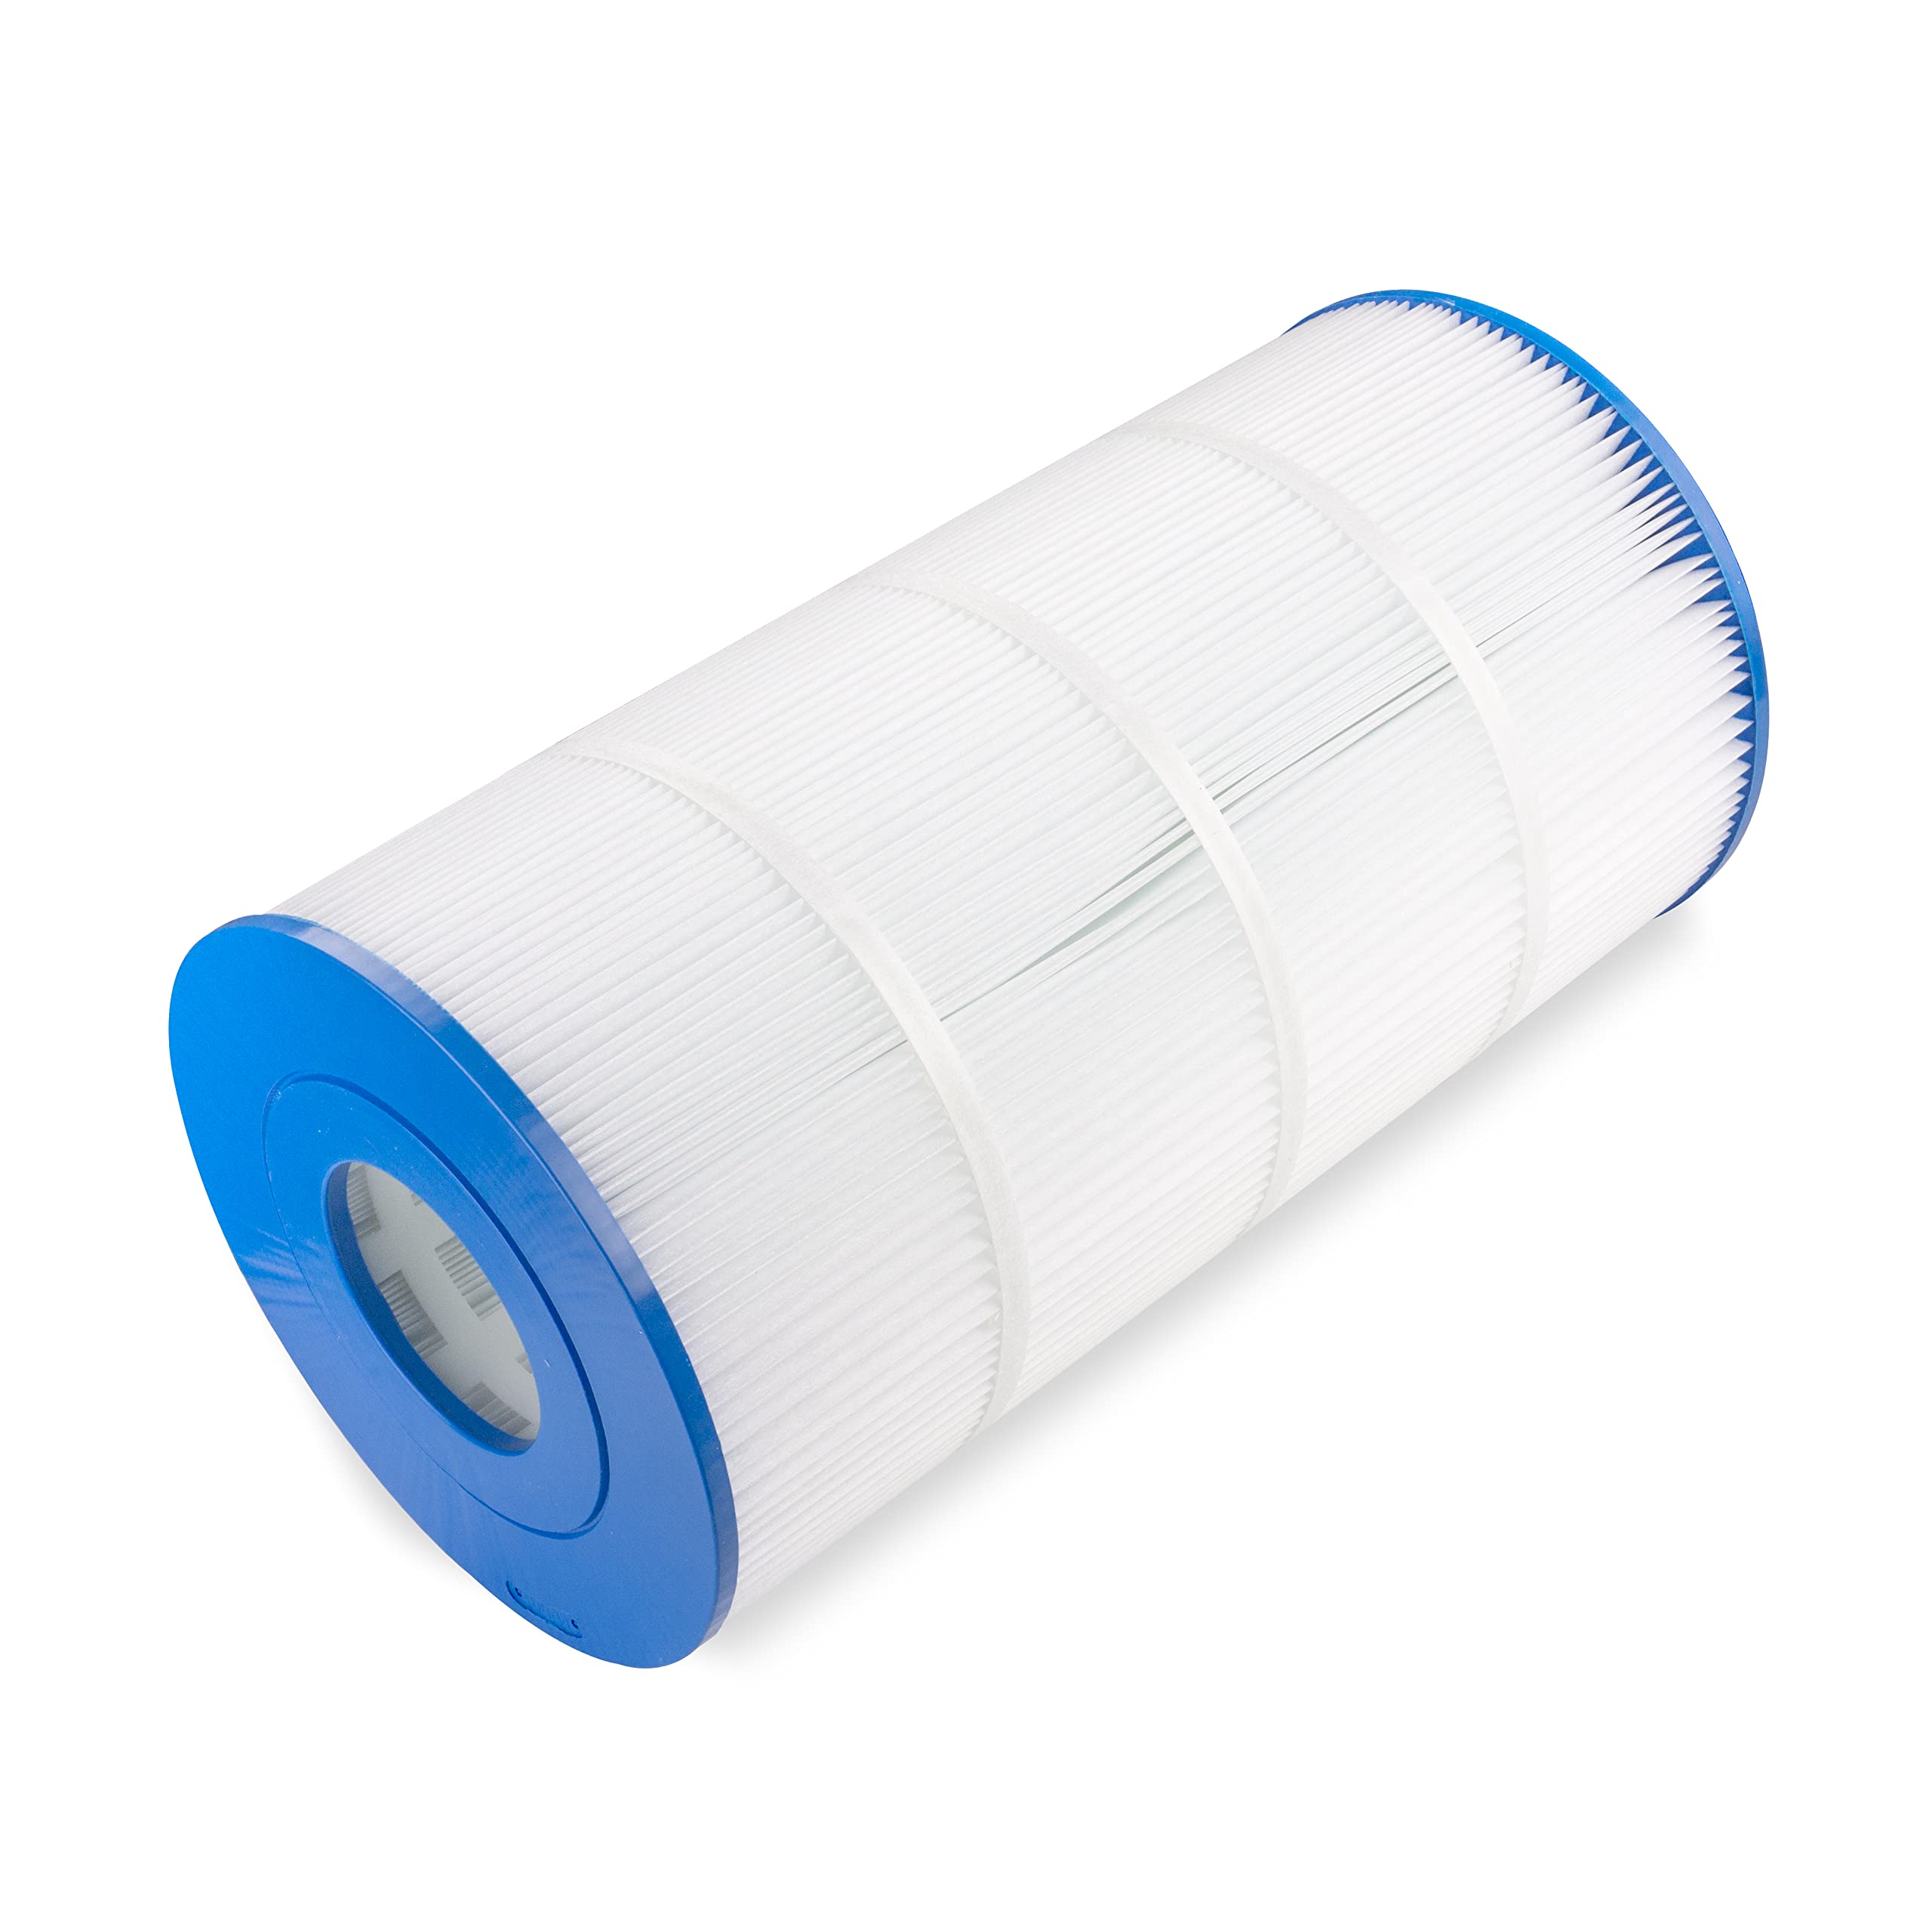 PURELINE Pool Replacement Cartridge Filter, 100 Sq Ft, PL0165, Compatible with Hayward C100S SwimClear, C-8408, CX100XRE